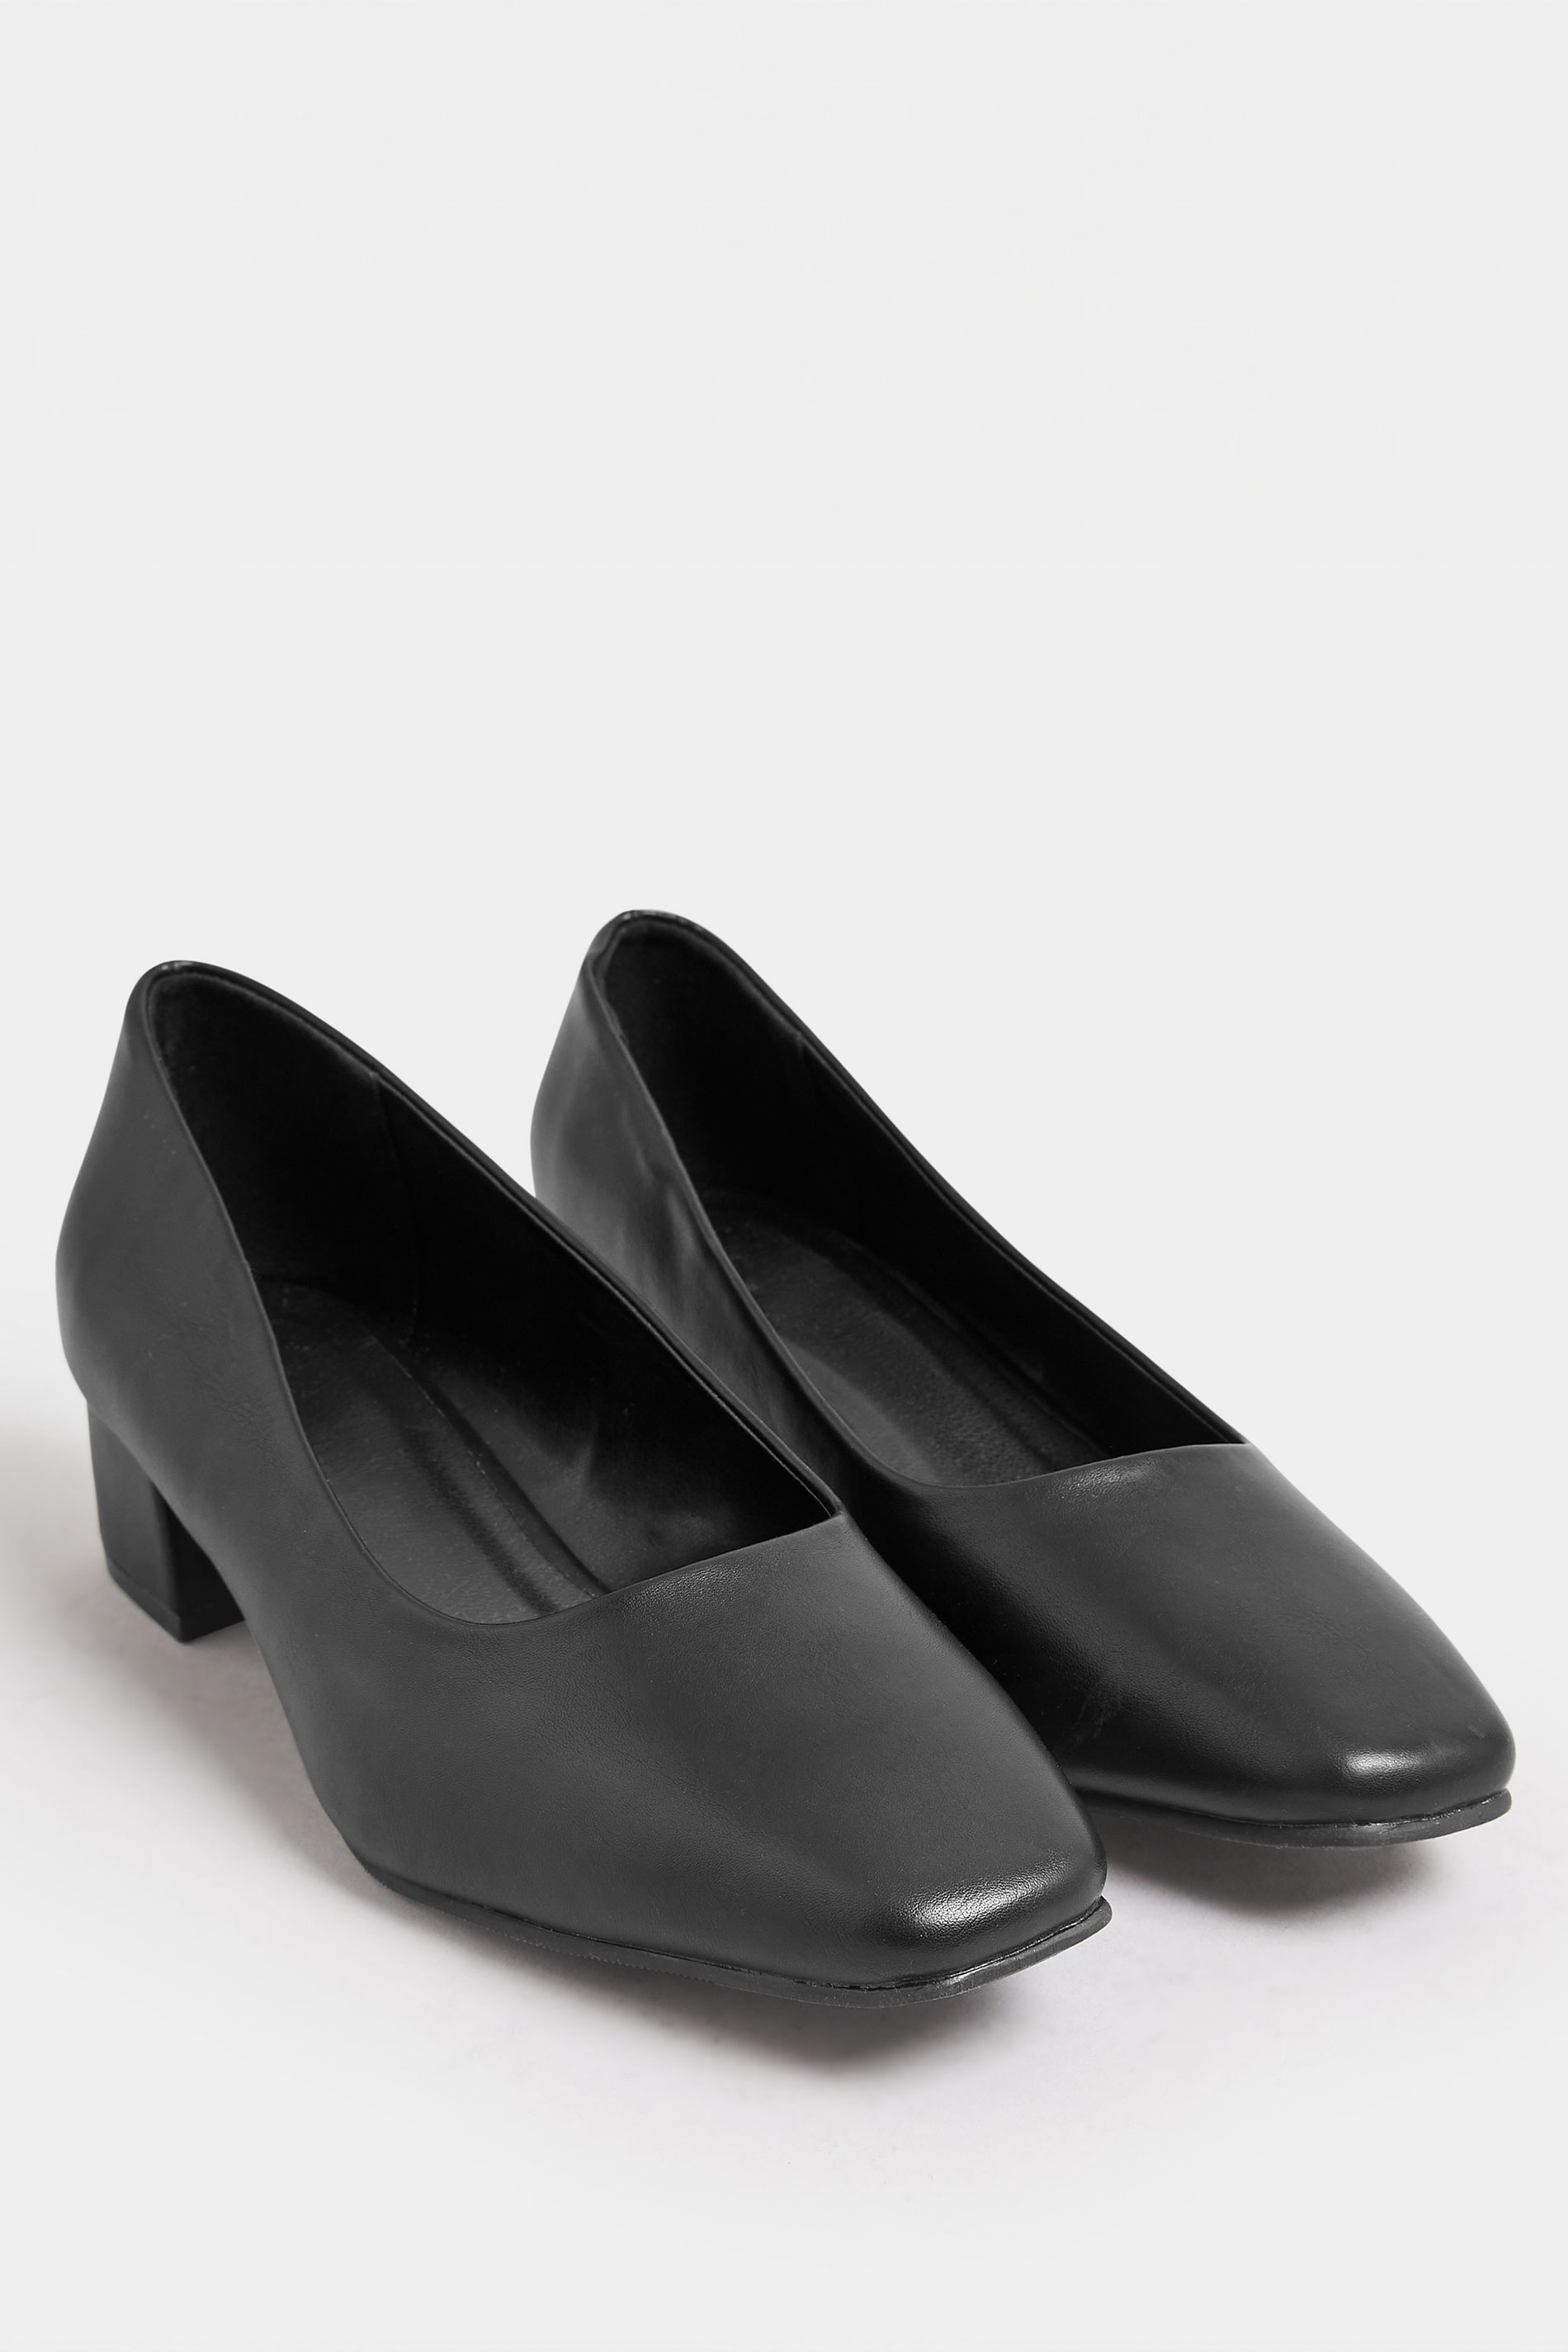 Black Faux Leather Block Heel Court Shoes In Extra Wide EEE Fit 2